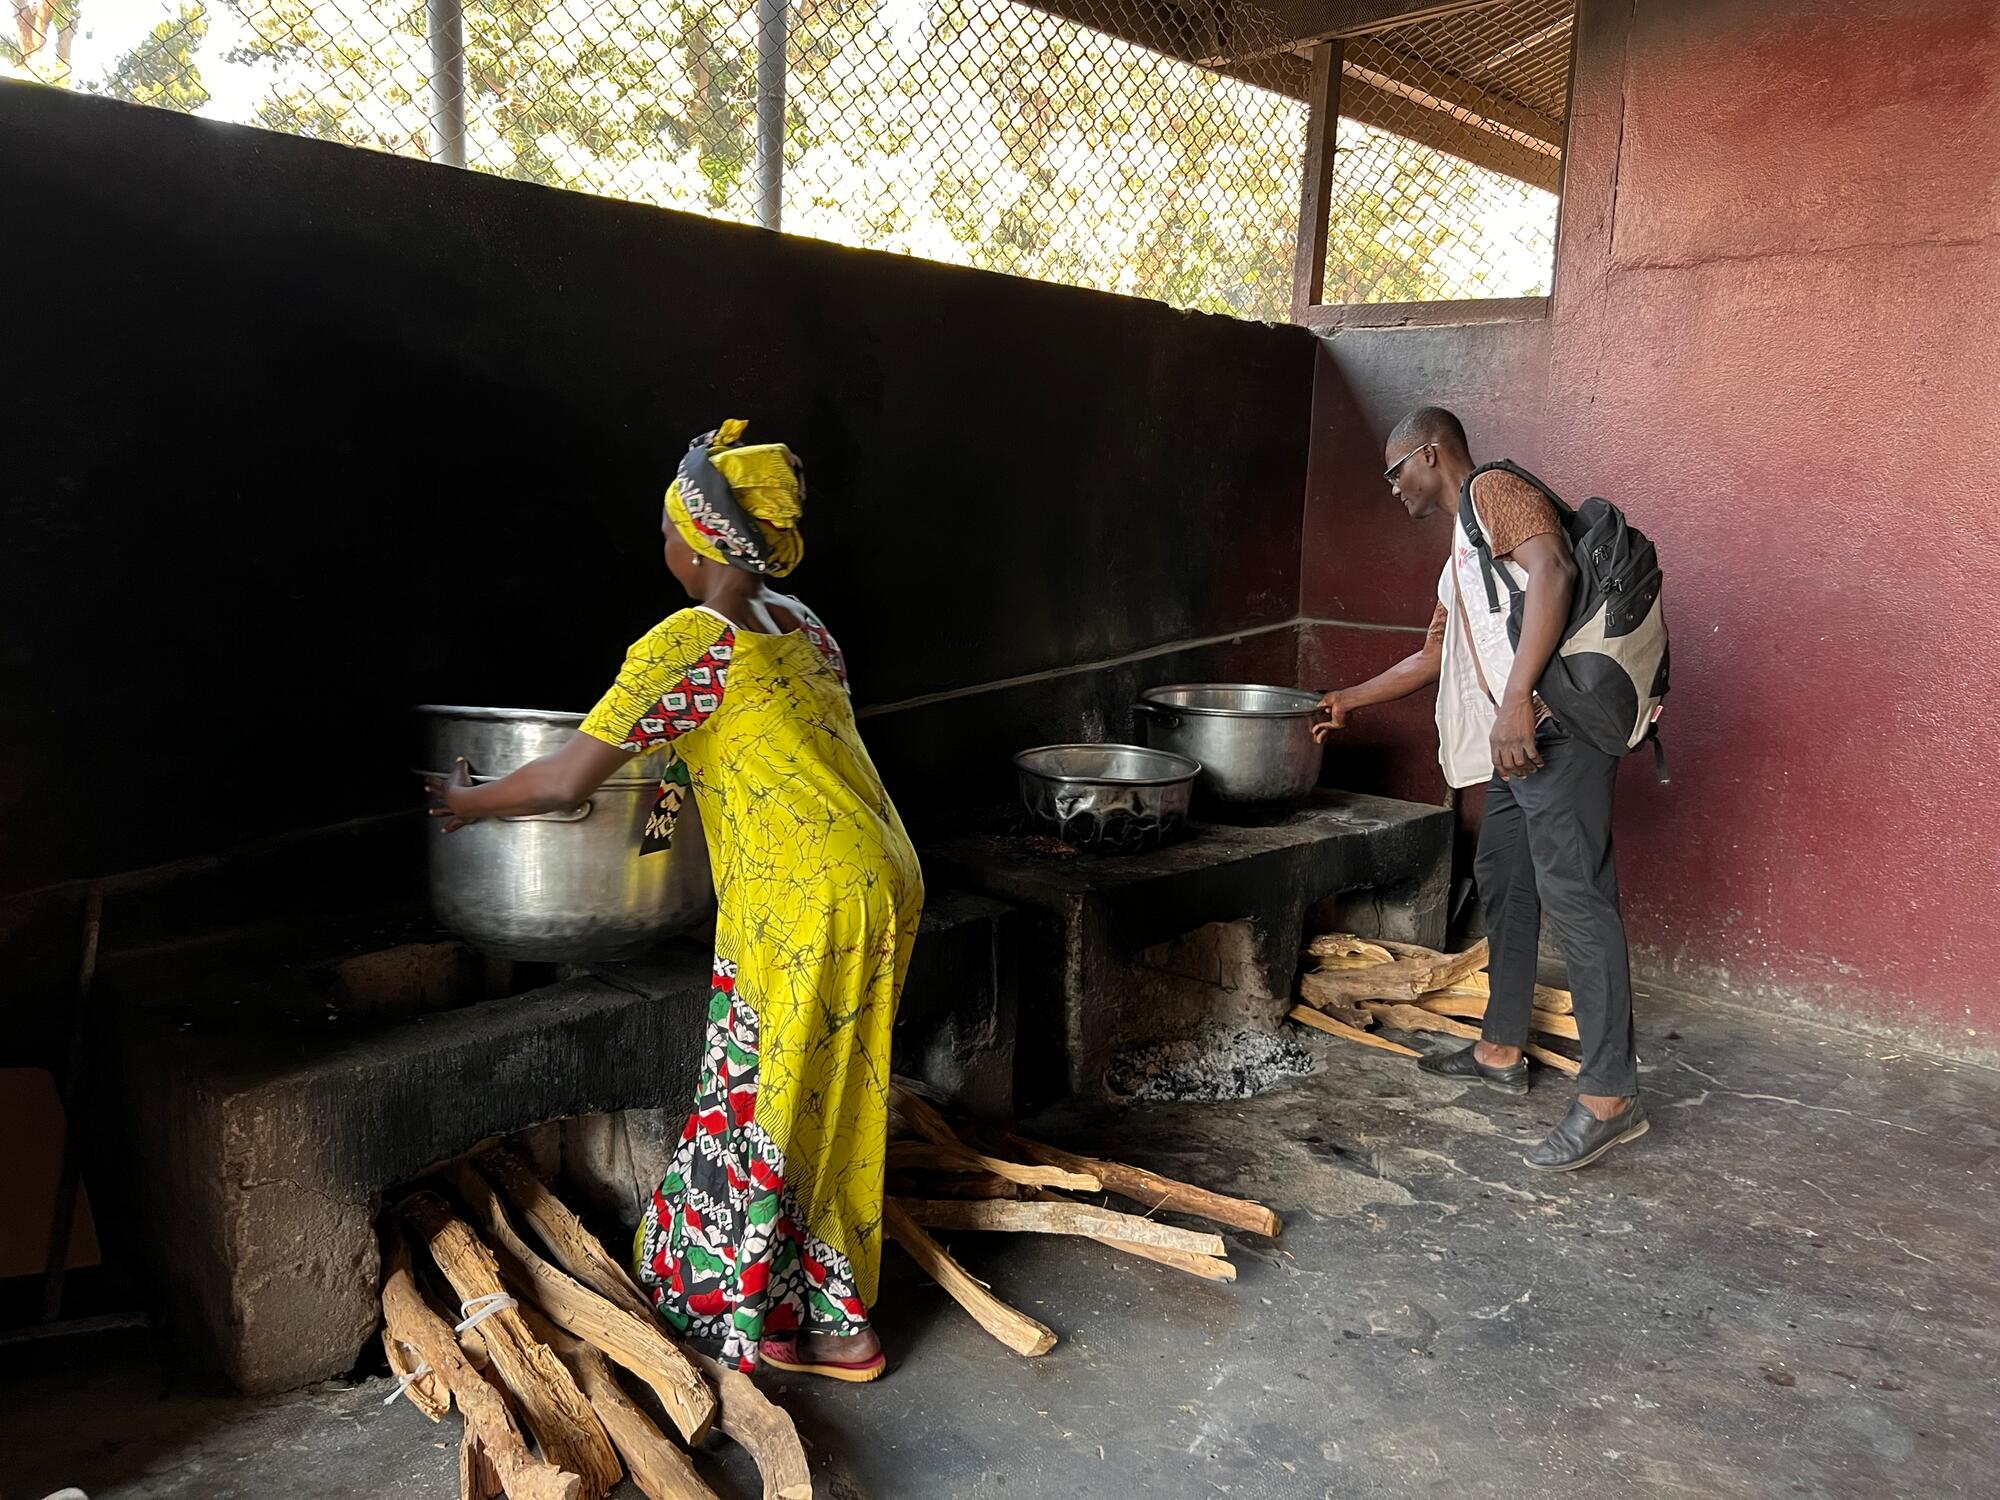 The cooks prepare 3 meals per day for patients and their companions. © Charlotte Sujobert/MSF